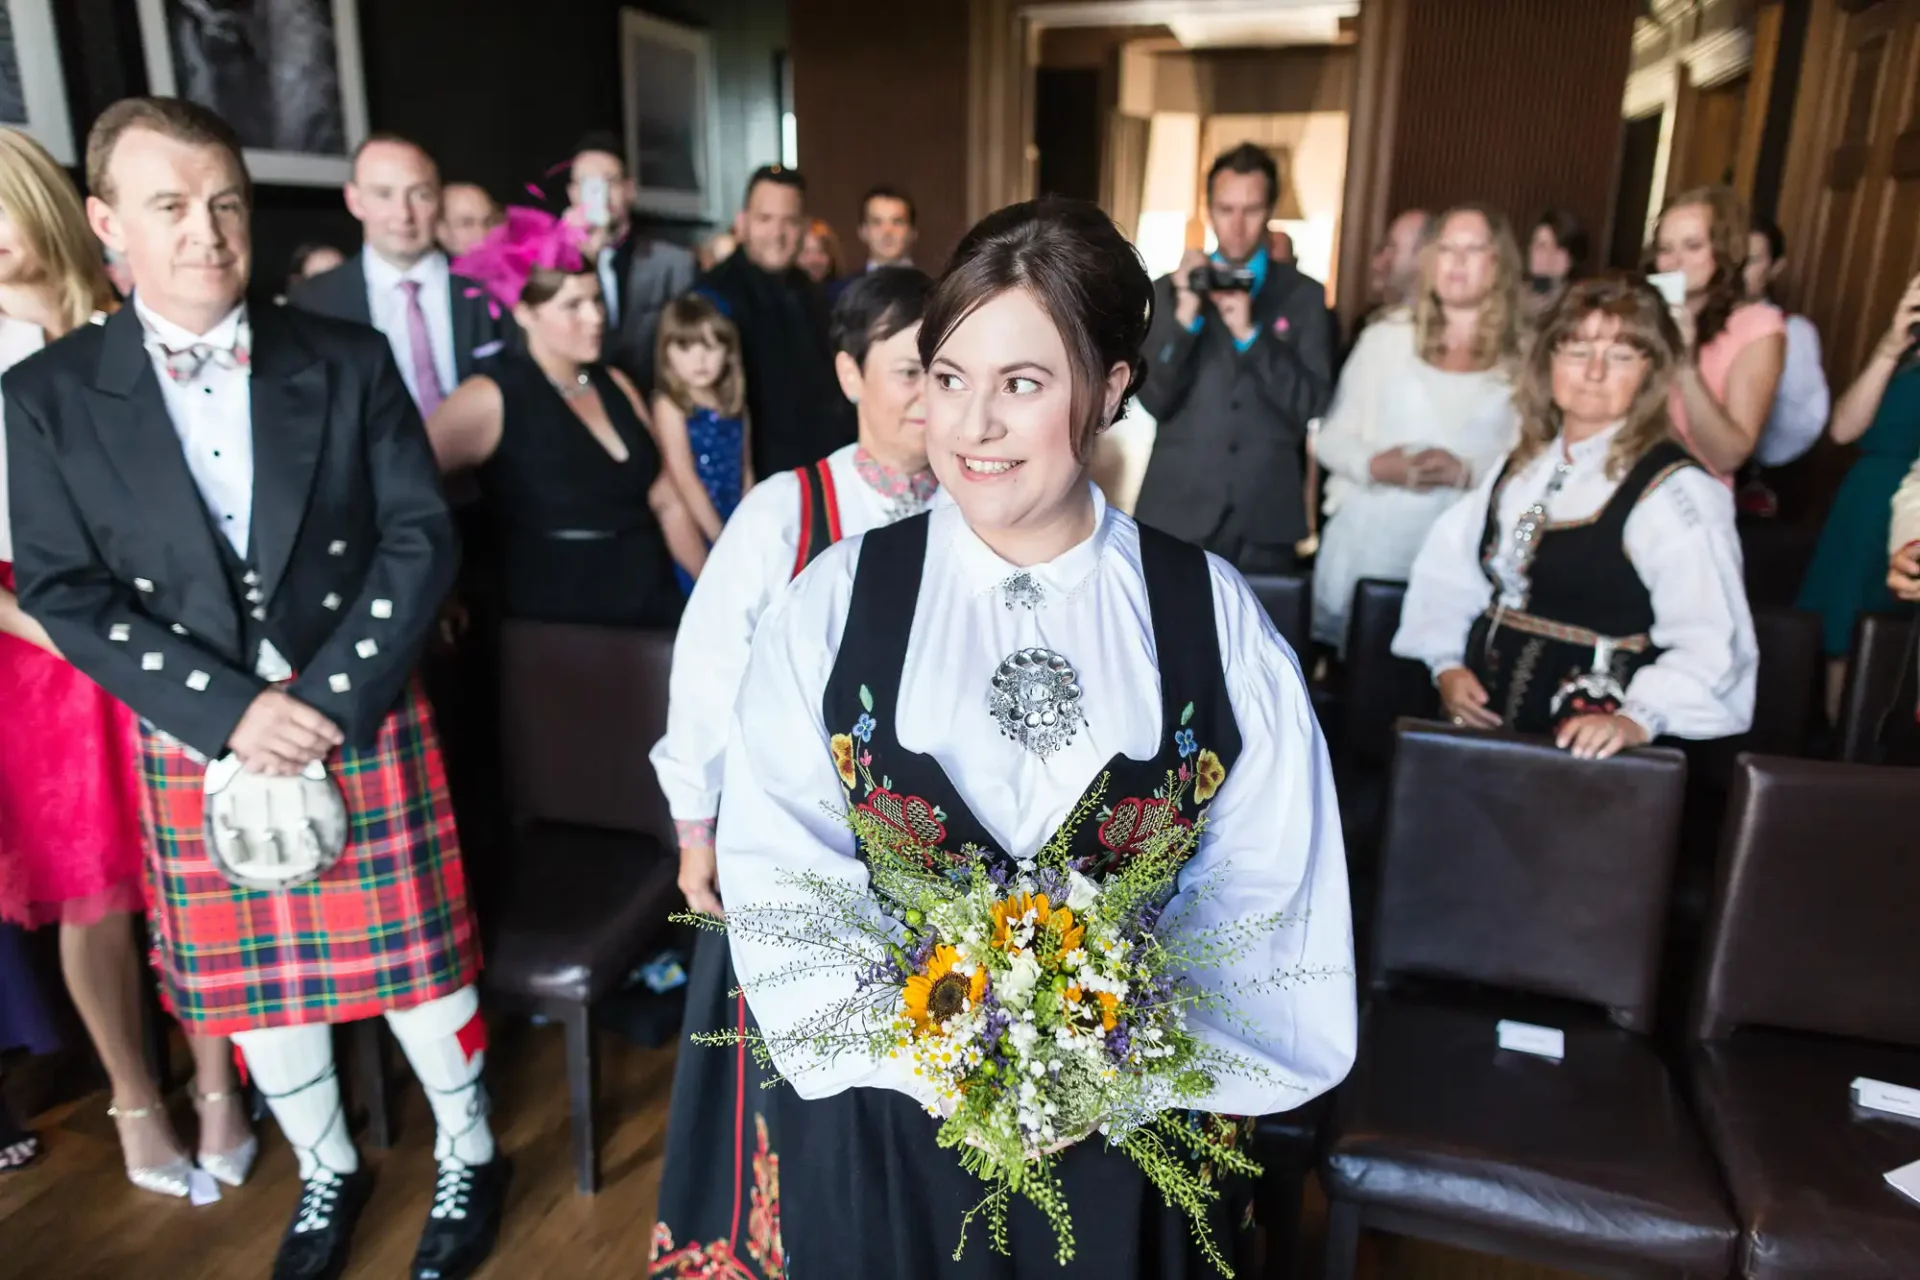 A bride in a traditional norwegian dress holding a bouquet, surrounded by guests in diverse attire at a wedding ceremony.